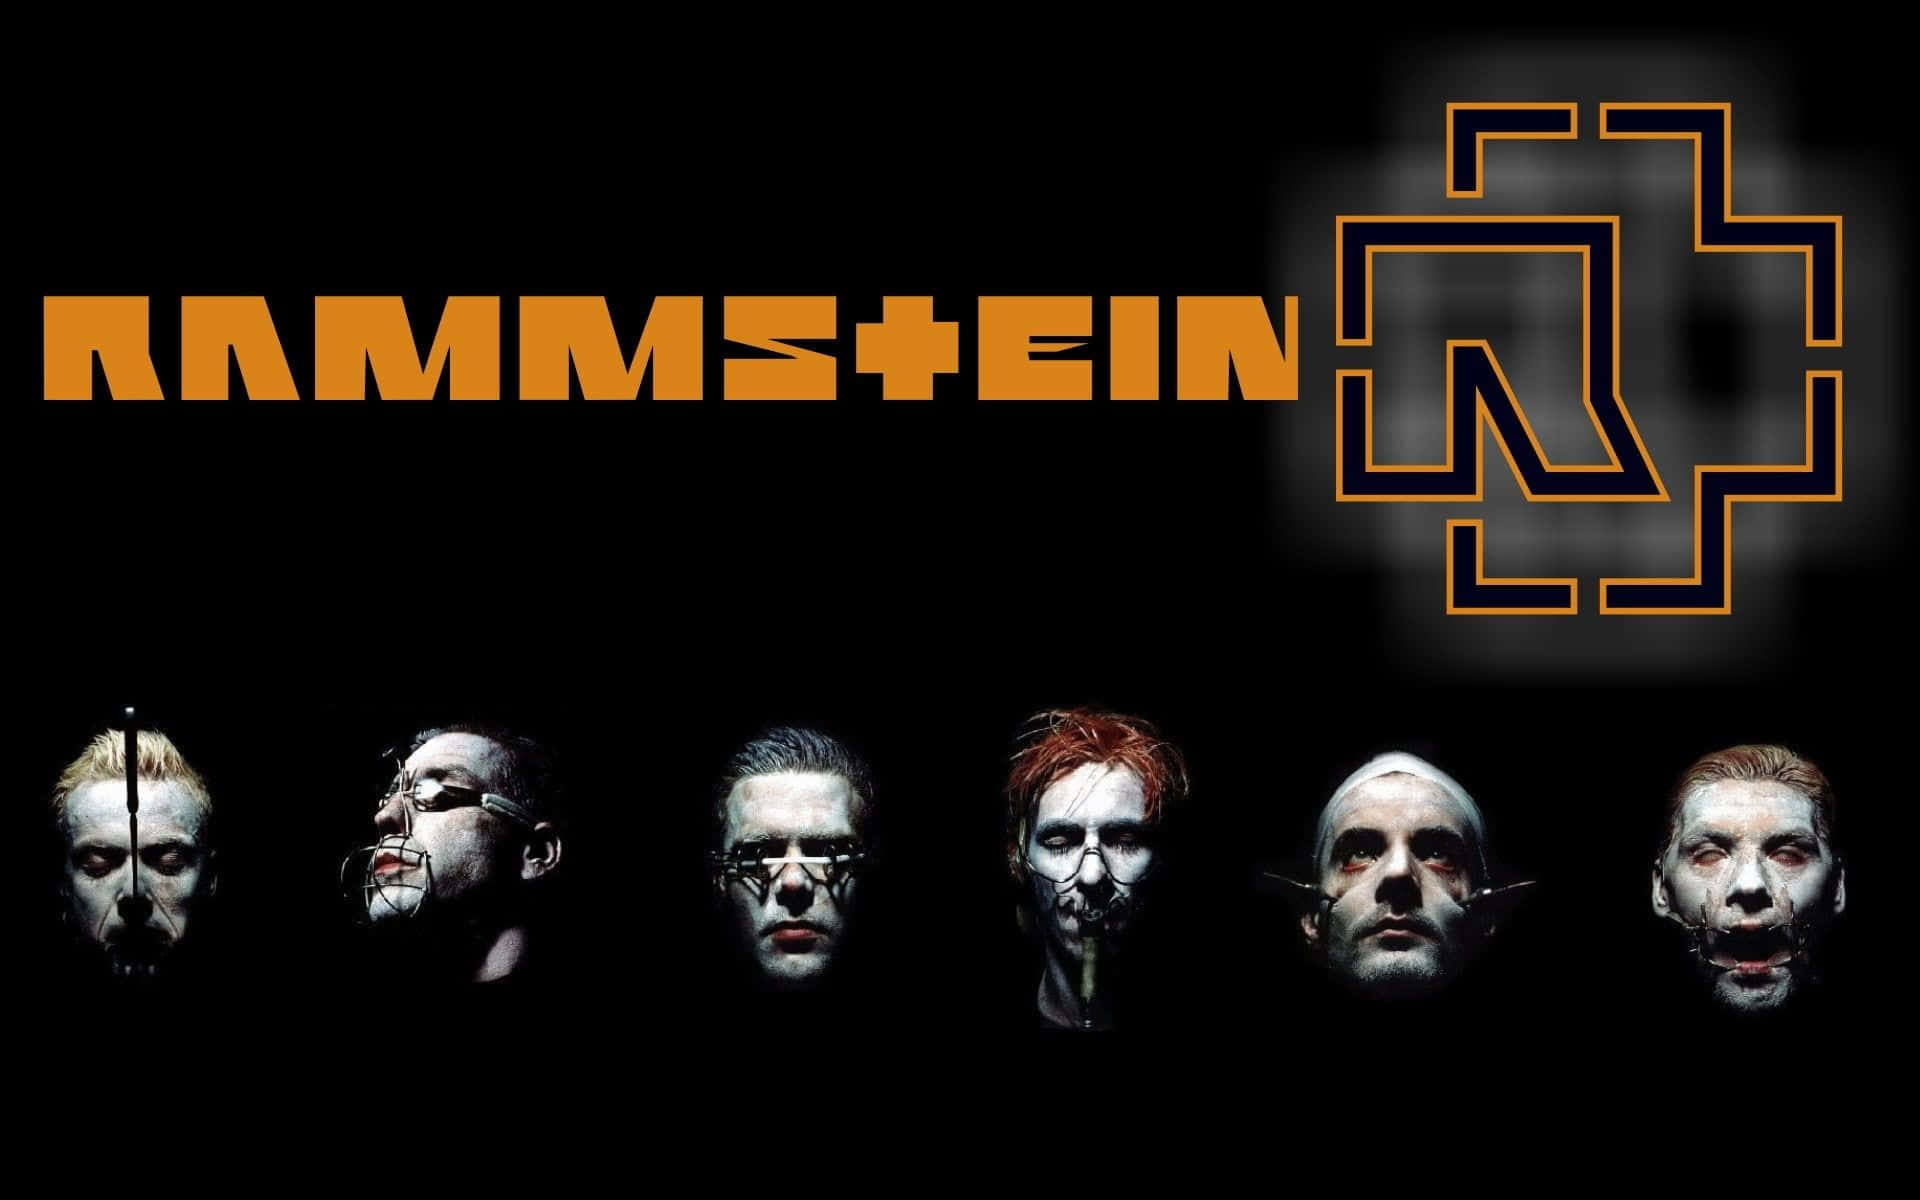 Rammstein Band Members Face Paint Background